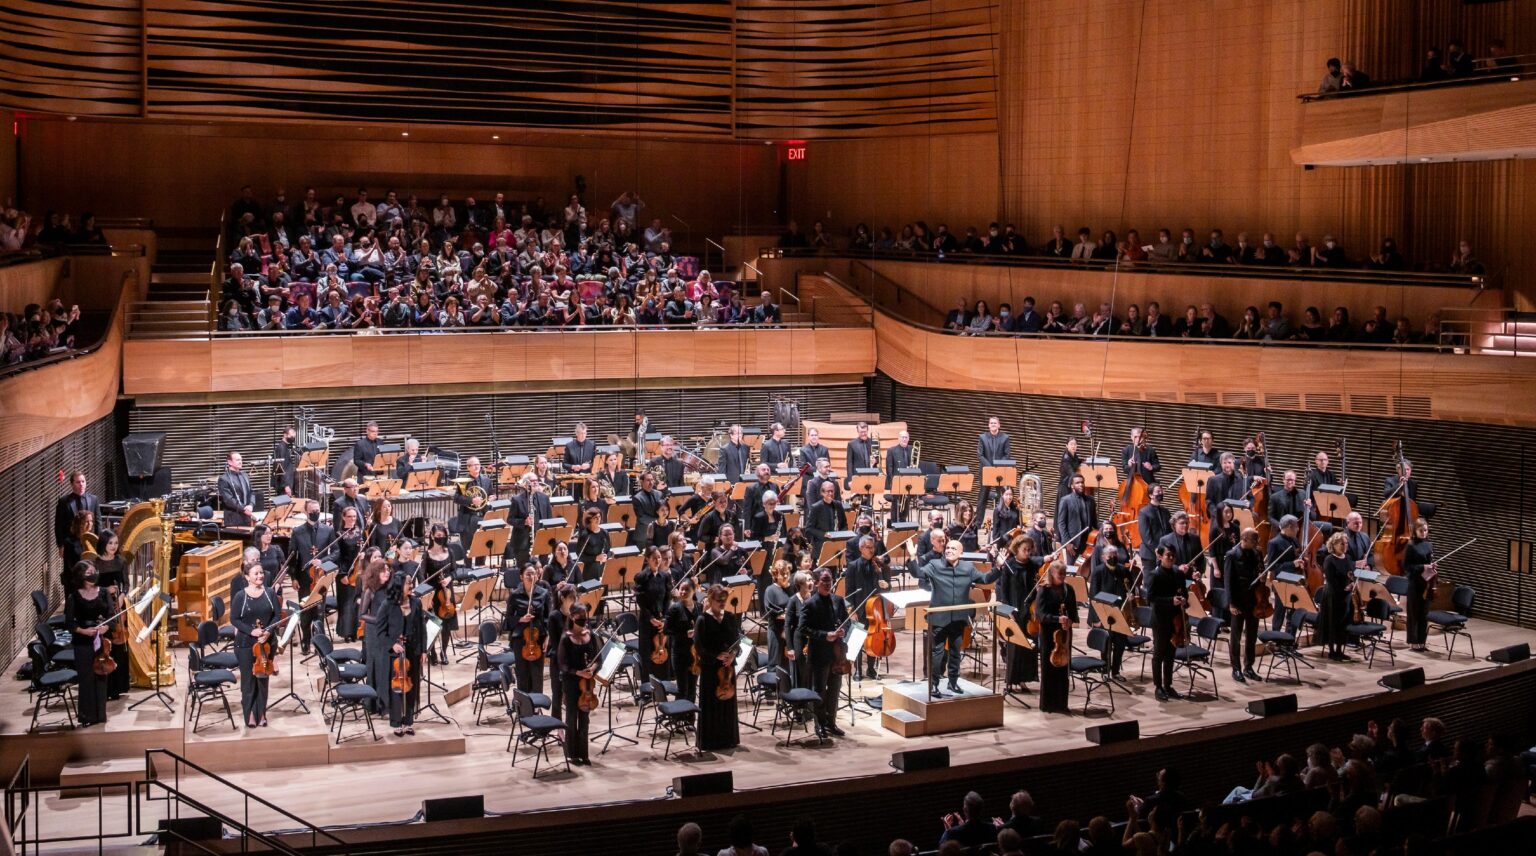 New York Philharmonic returns to Hong Kong after 15 years